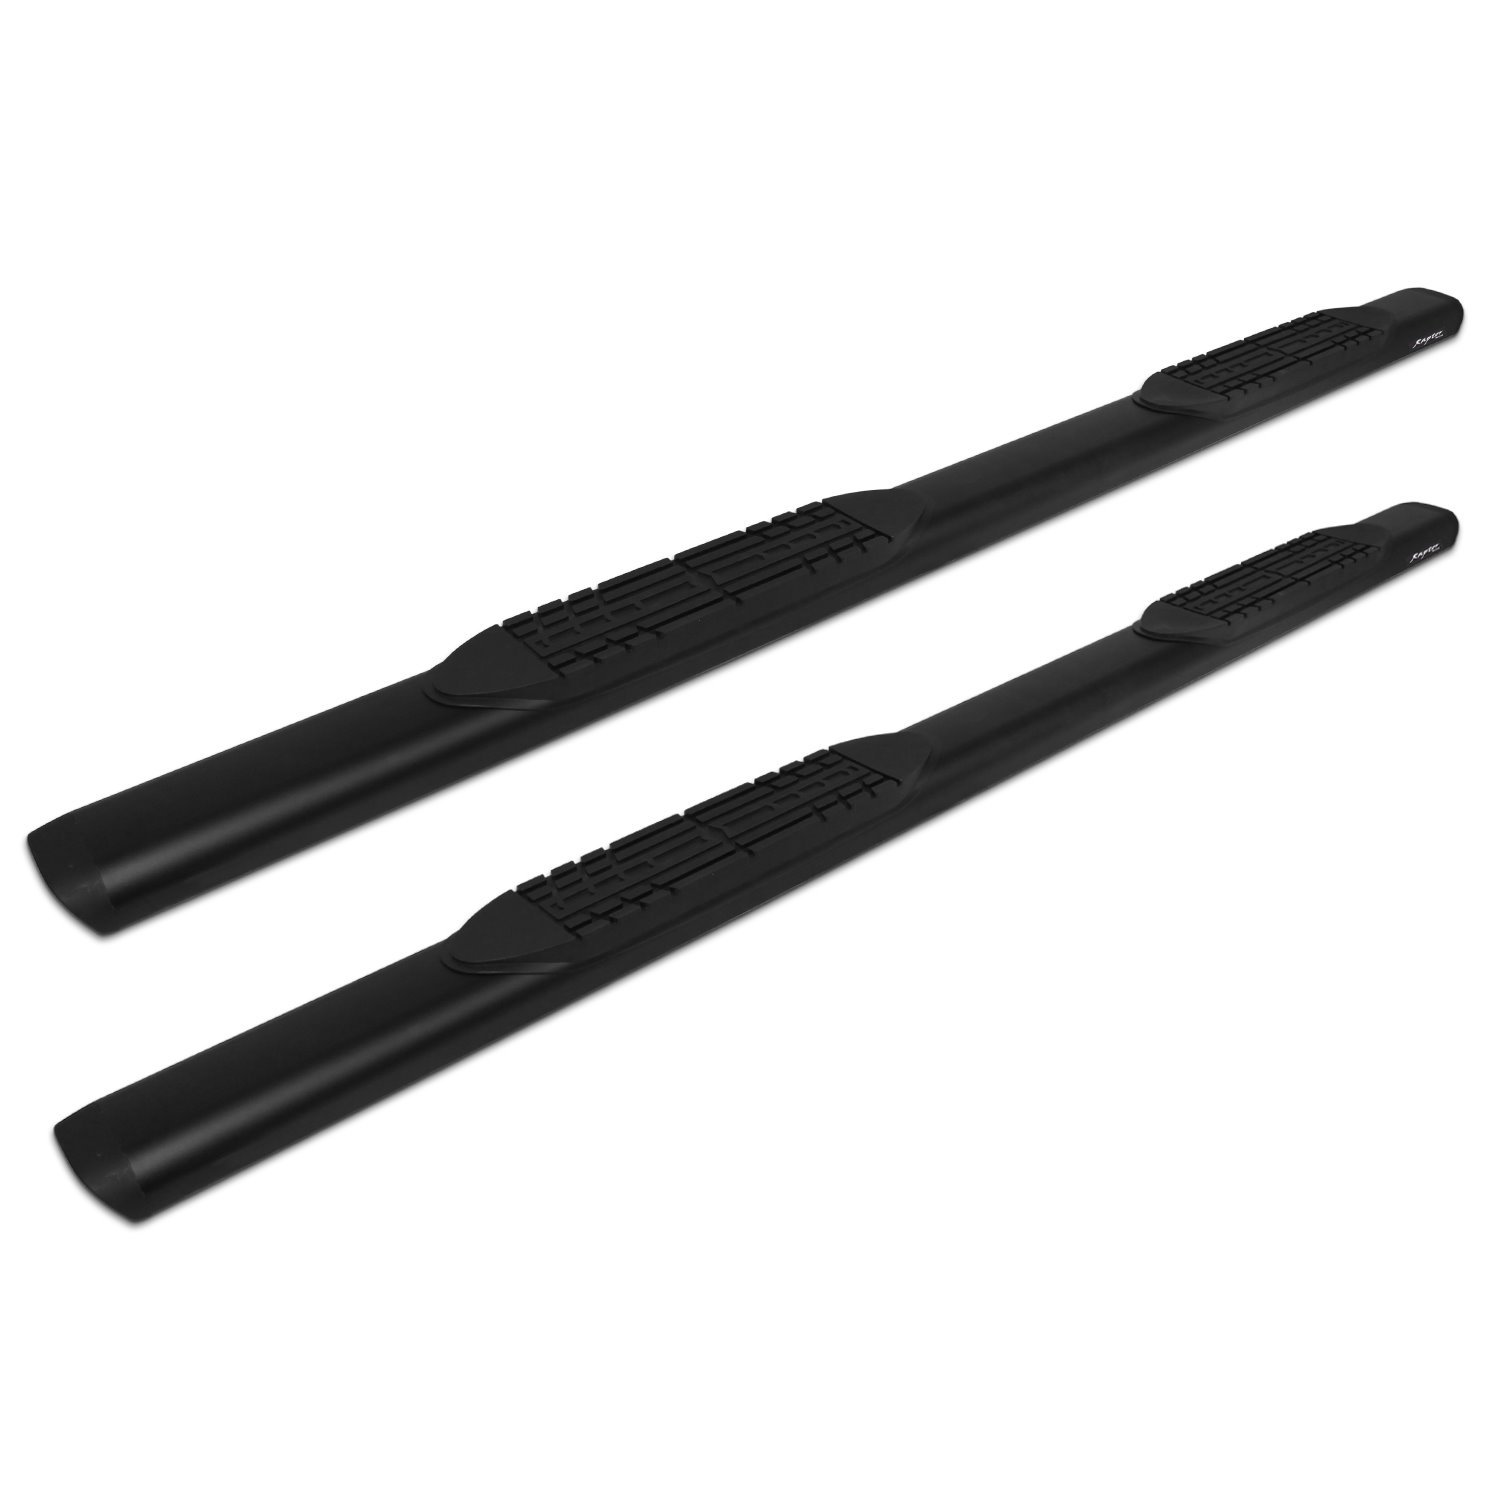 2002-0602BT 5 in Oval Style Slide Track Running Boards, Black Aluminum, Fits Select Dodge Ram 1500 New Body Style Crew Cab